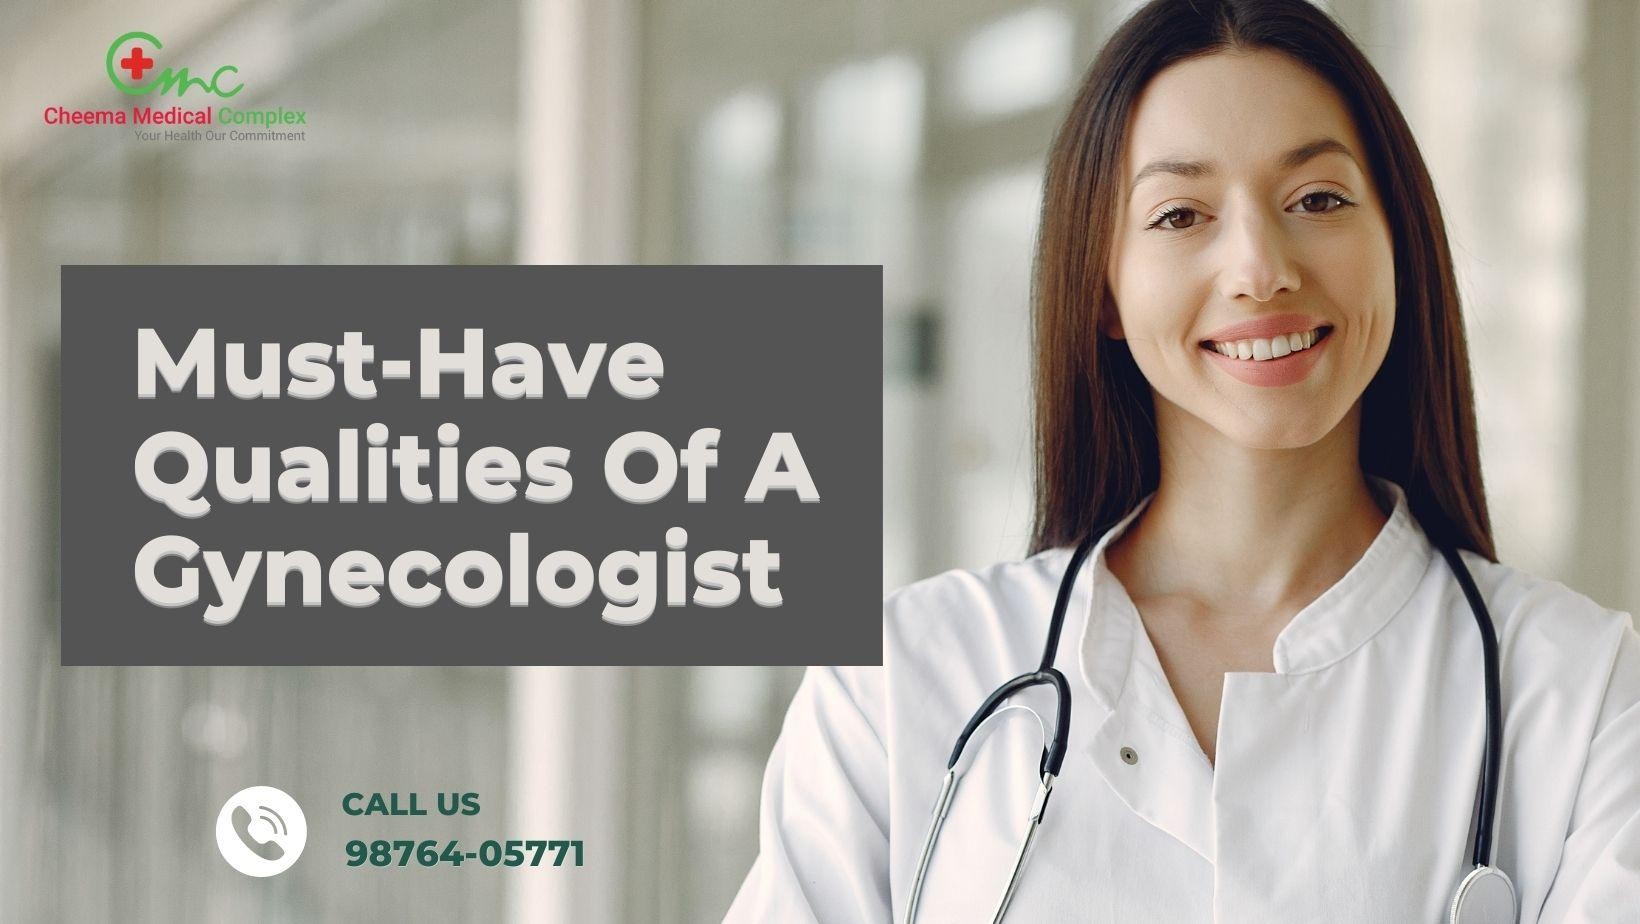 8 Must-Have Qualities Of A Gynecologist